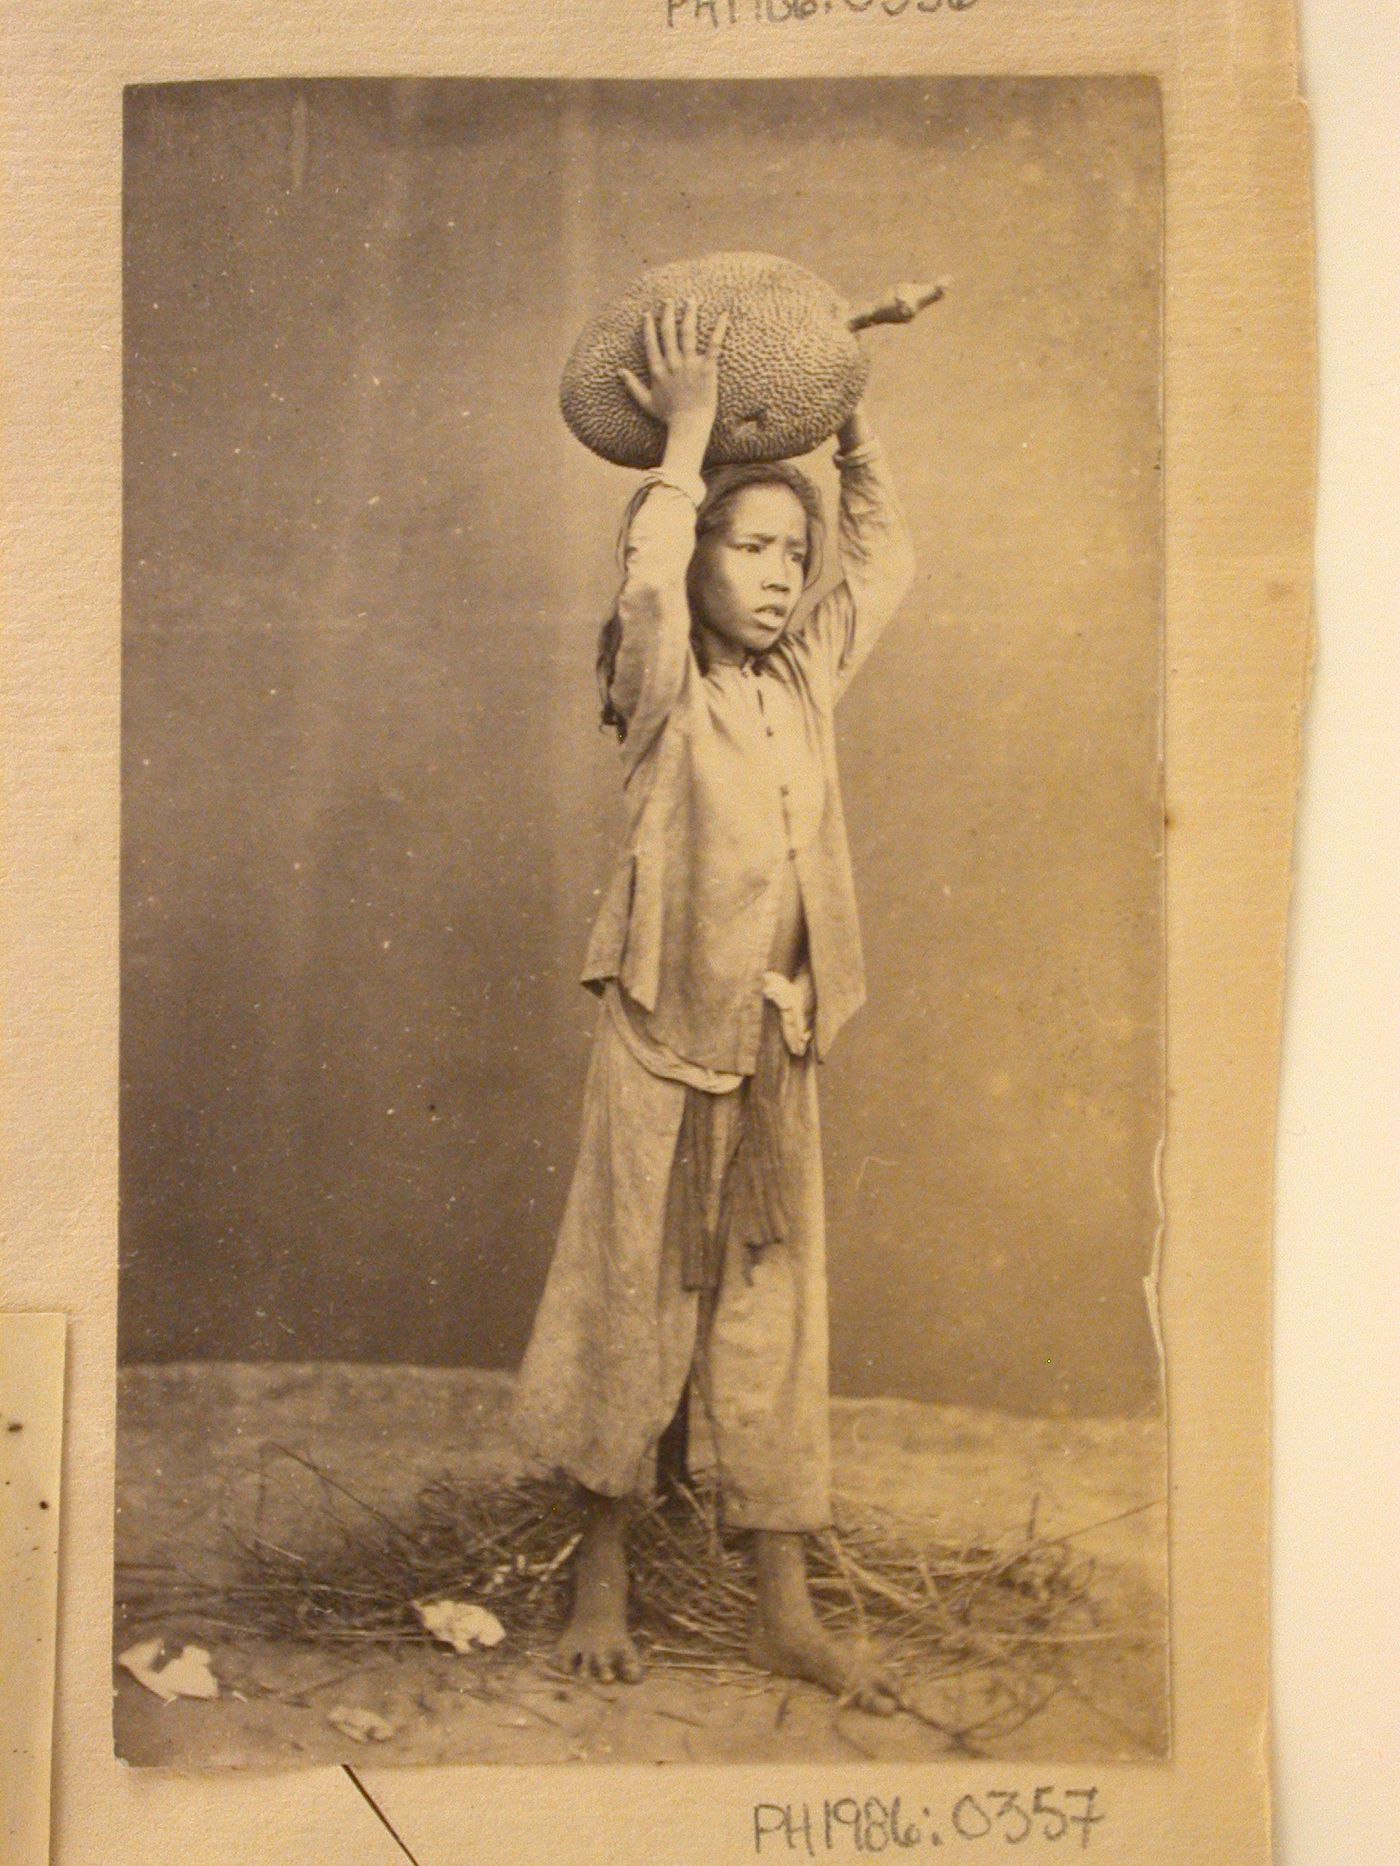 Portrait of a boy holding a durien fruit, probably in Cochin China (now in Vietnam)